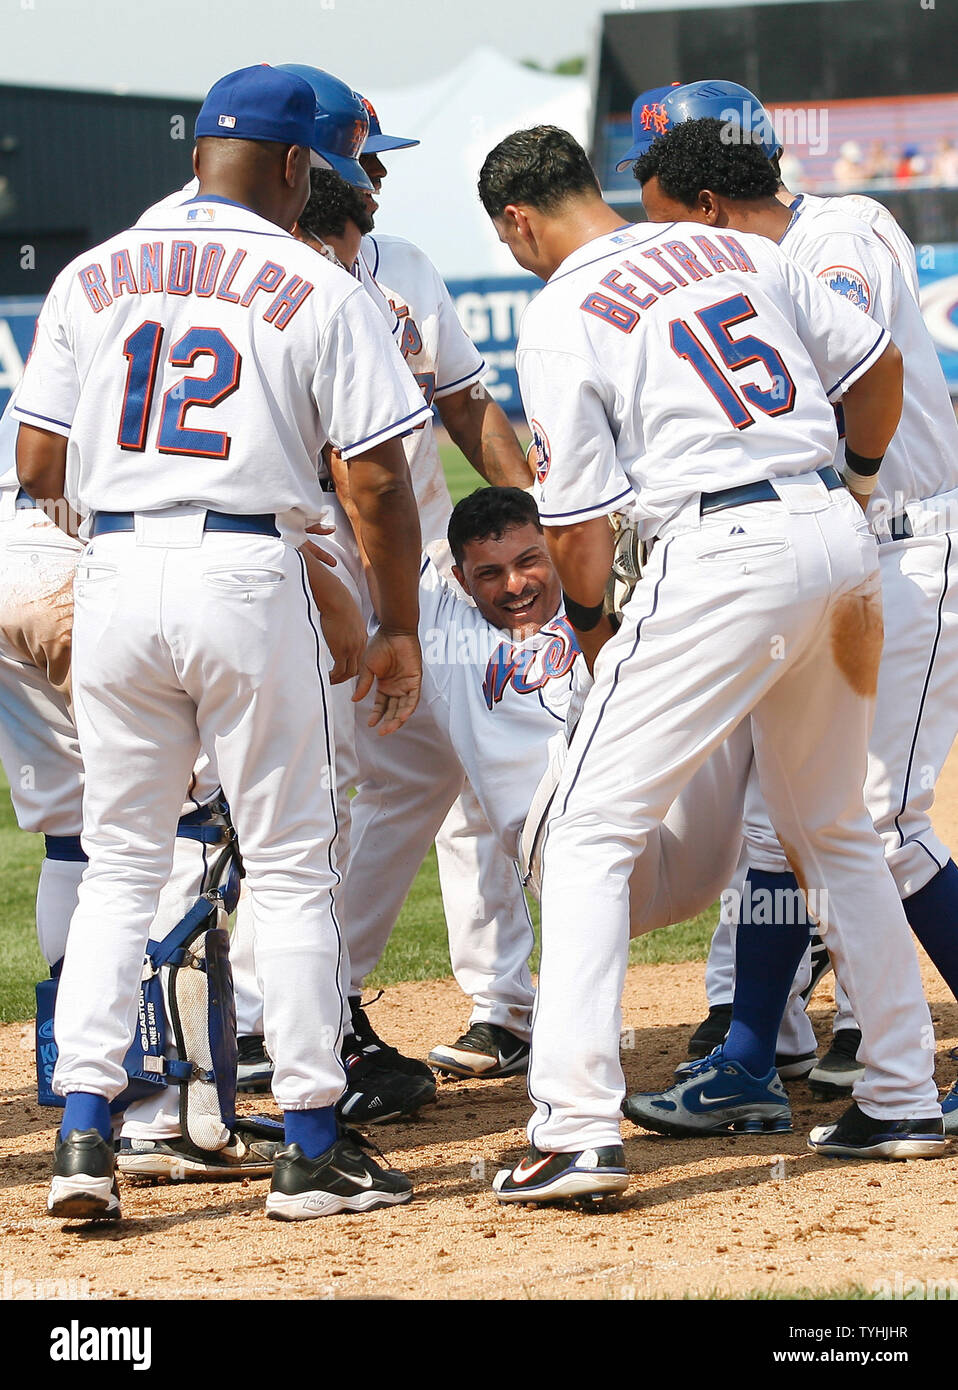 New York Mets Jose Valentin gets lifted and draged by his